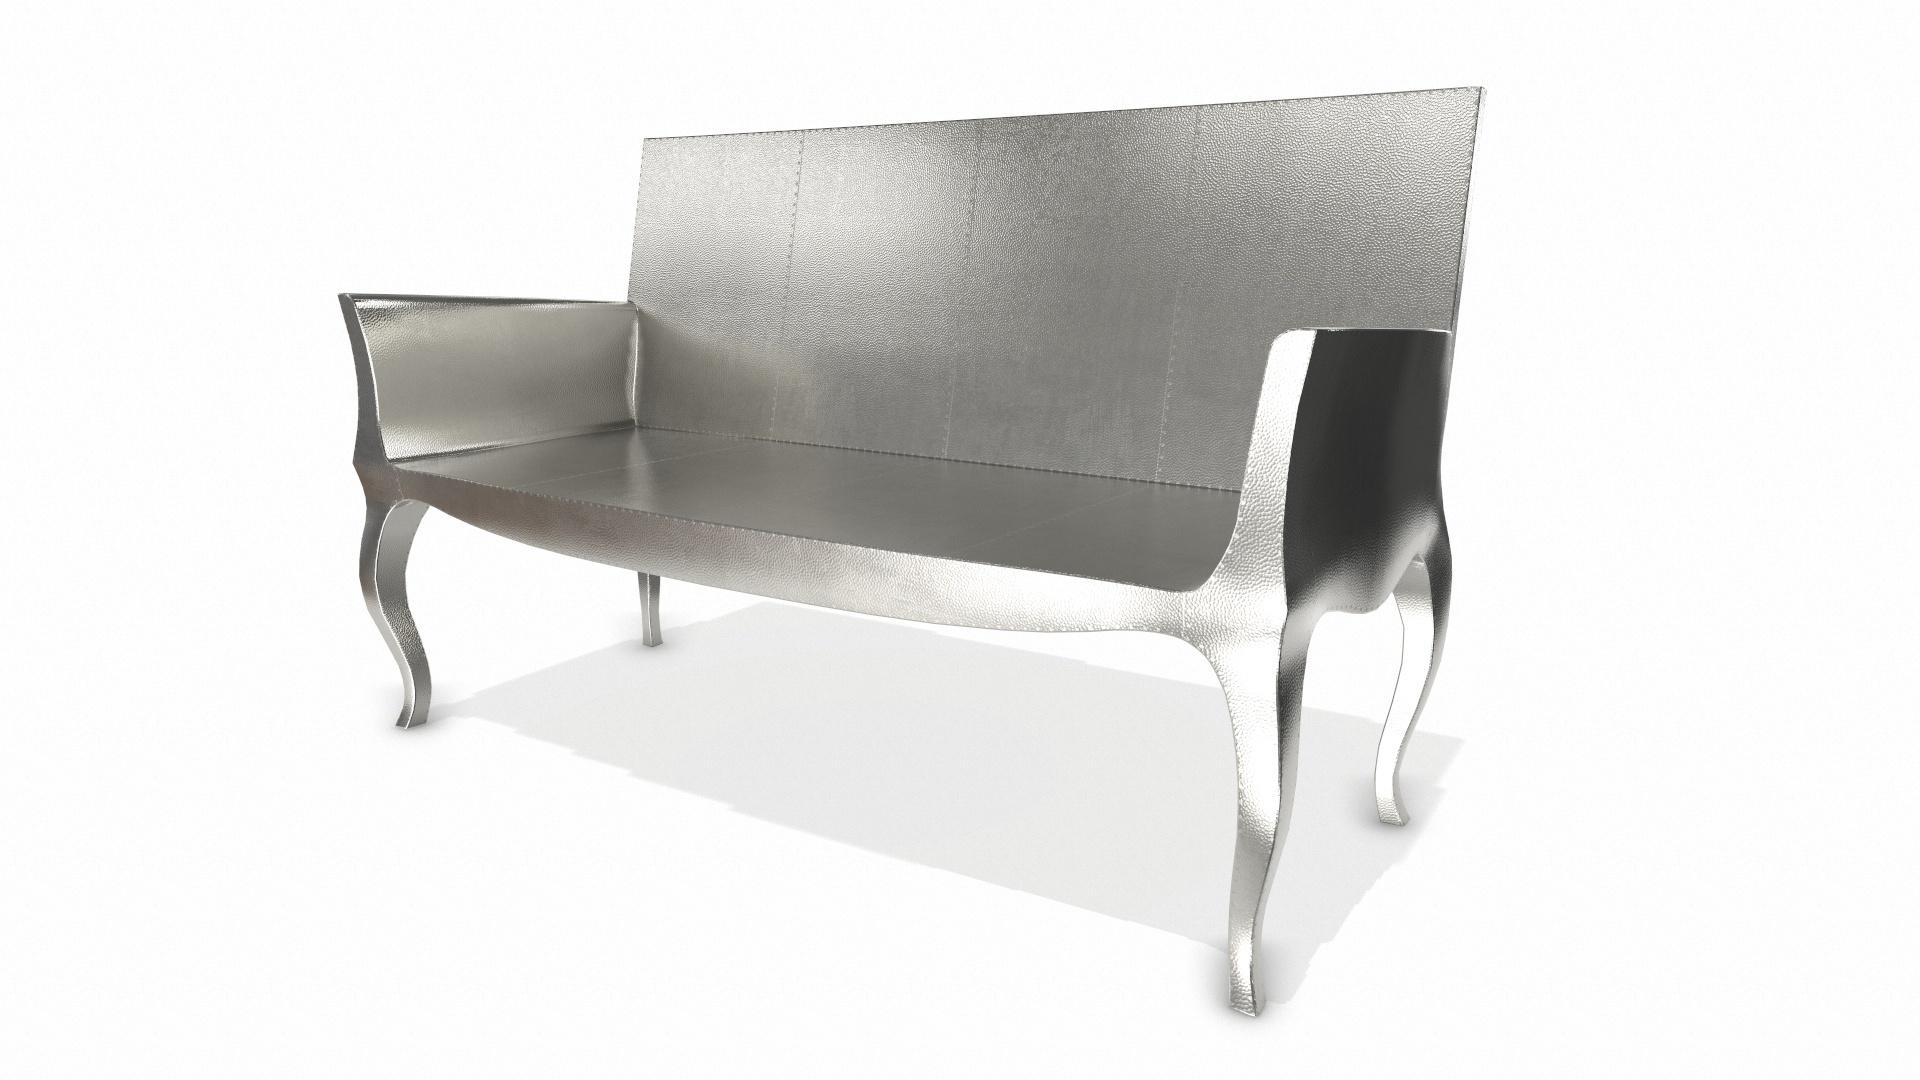 American Louise Settee Art Deco Loveseats in Mid. Hammered White Bronze by Paul Mathieu  For Sale